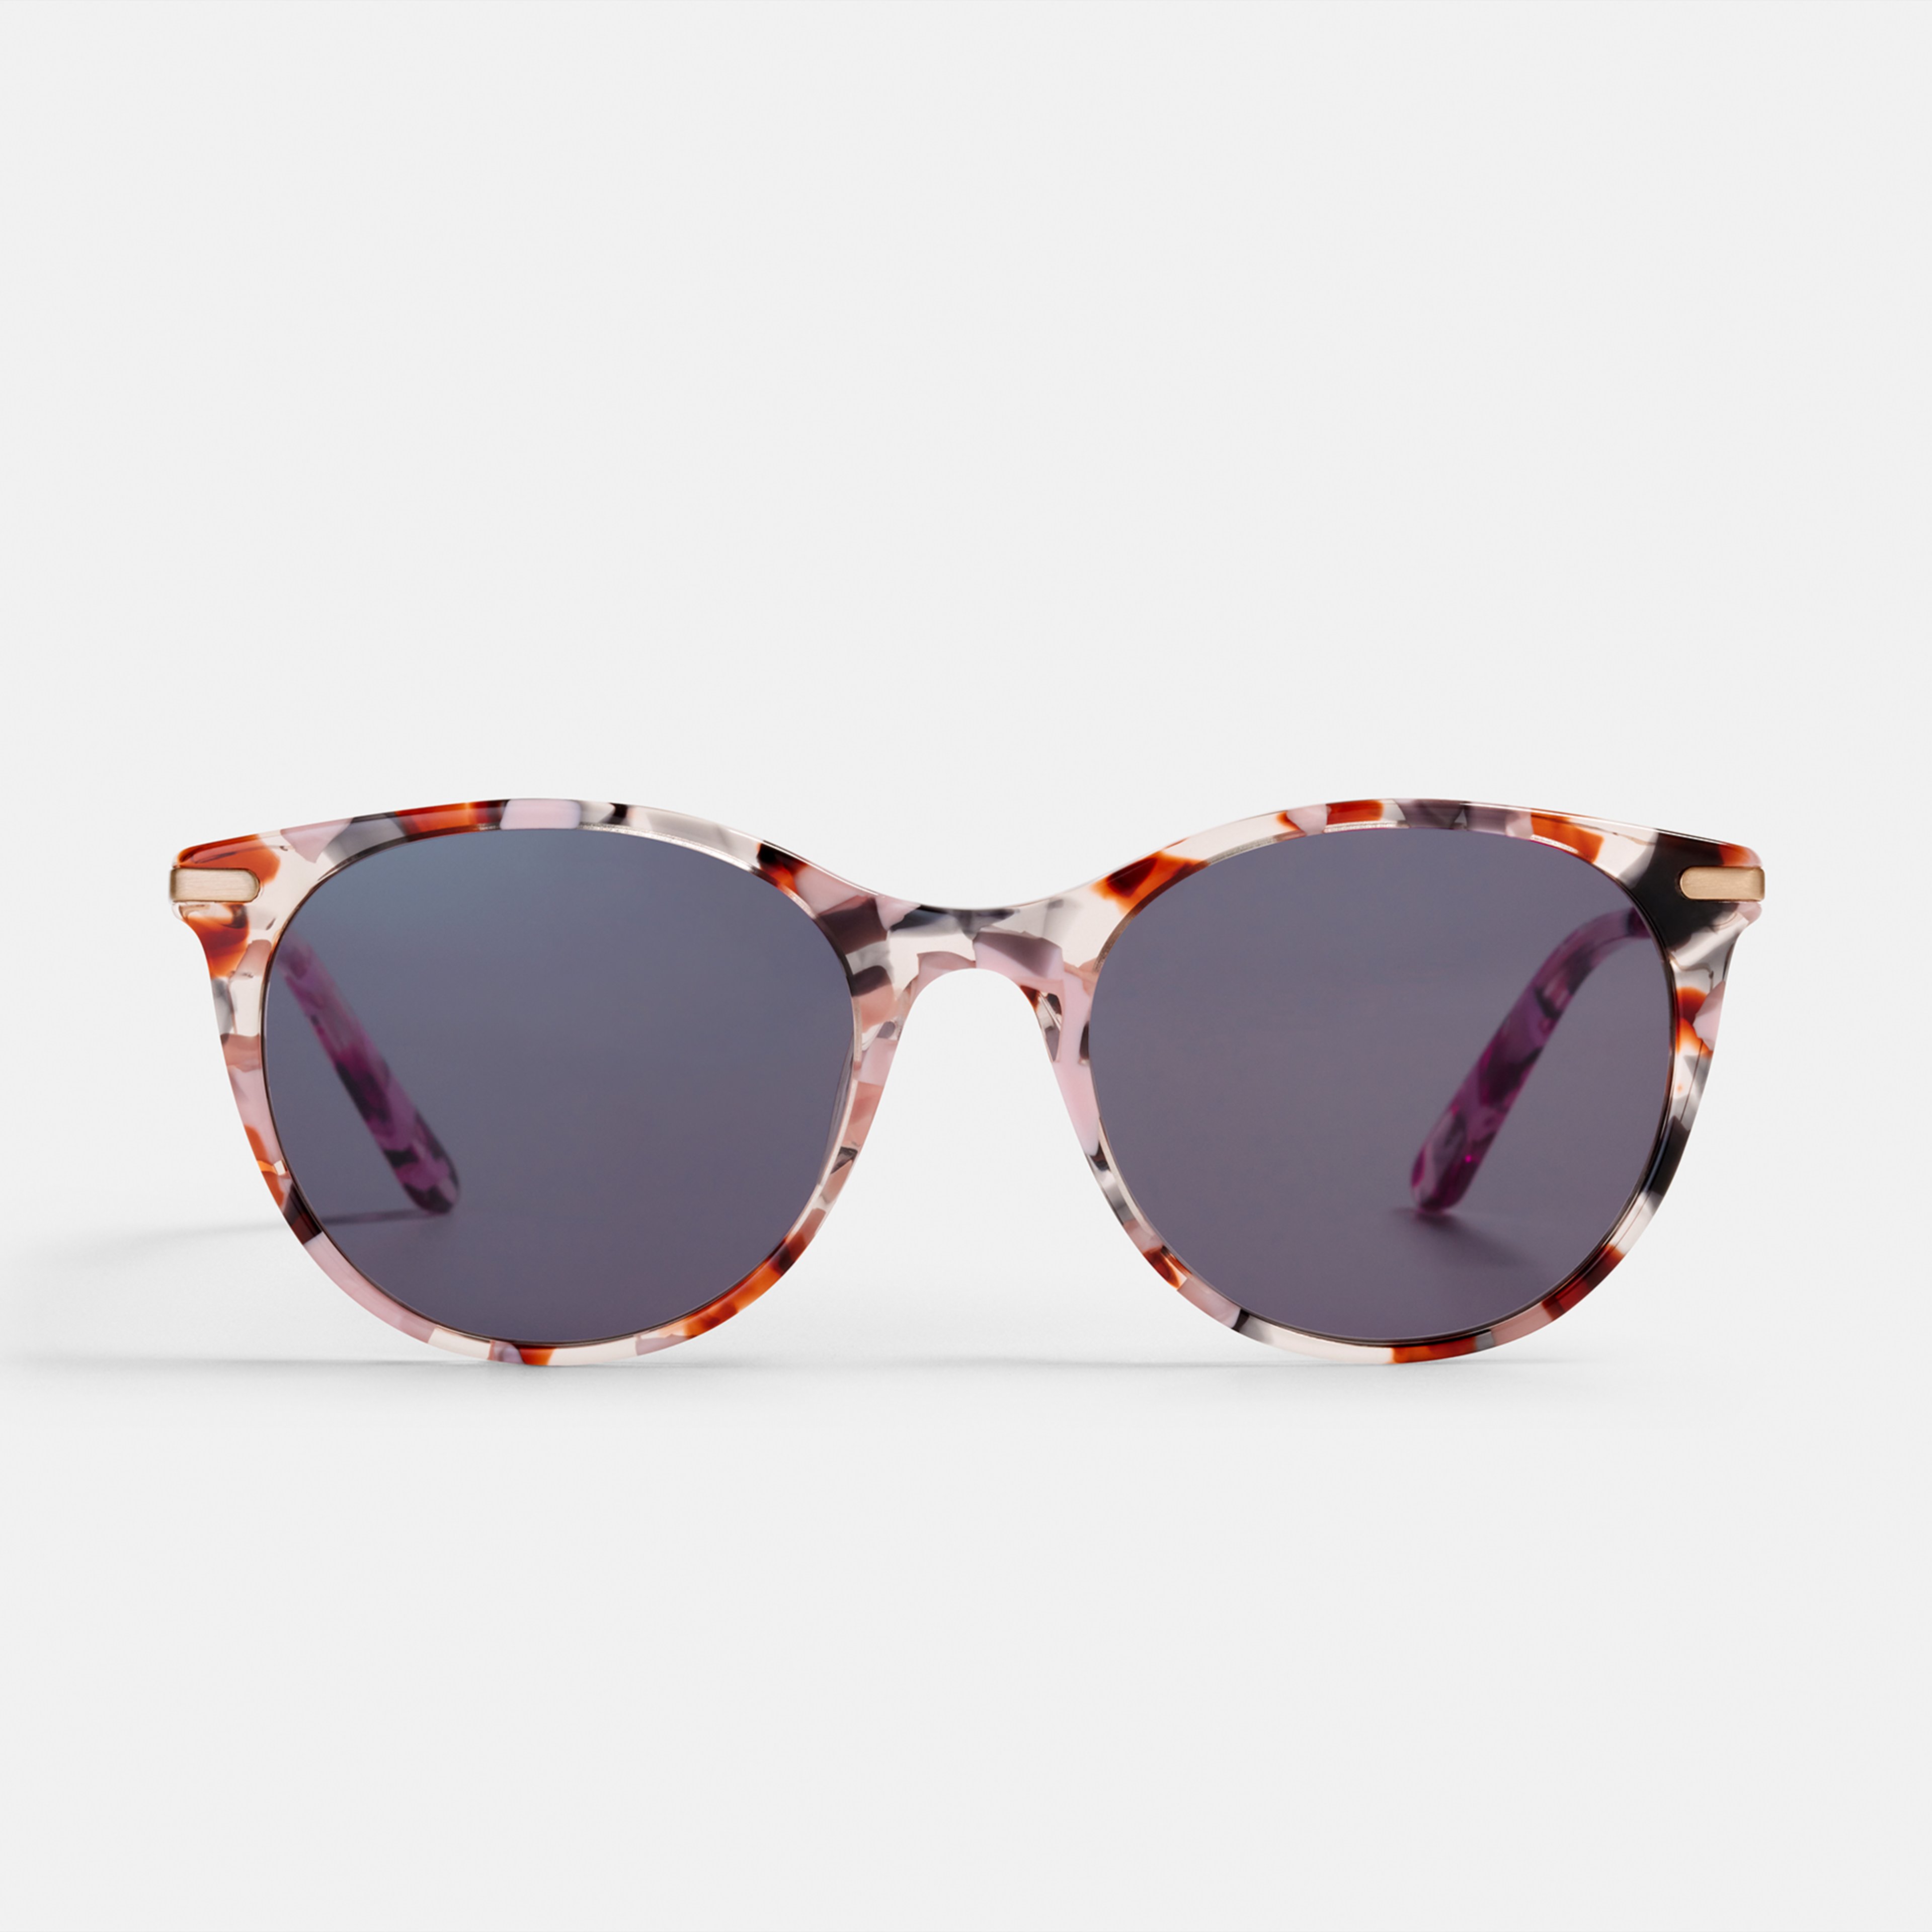 Ace & Tate Sunglasses | Round Combi in Grey, Purple, Red